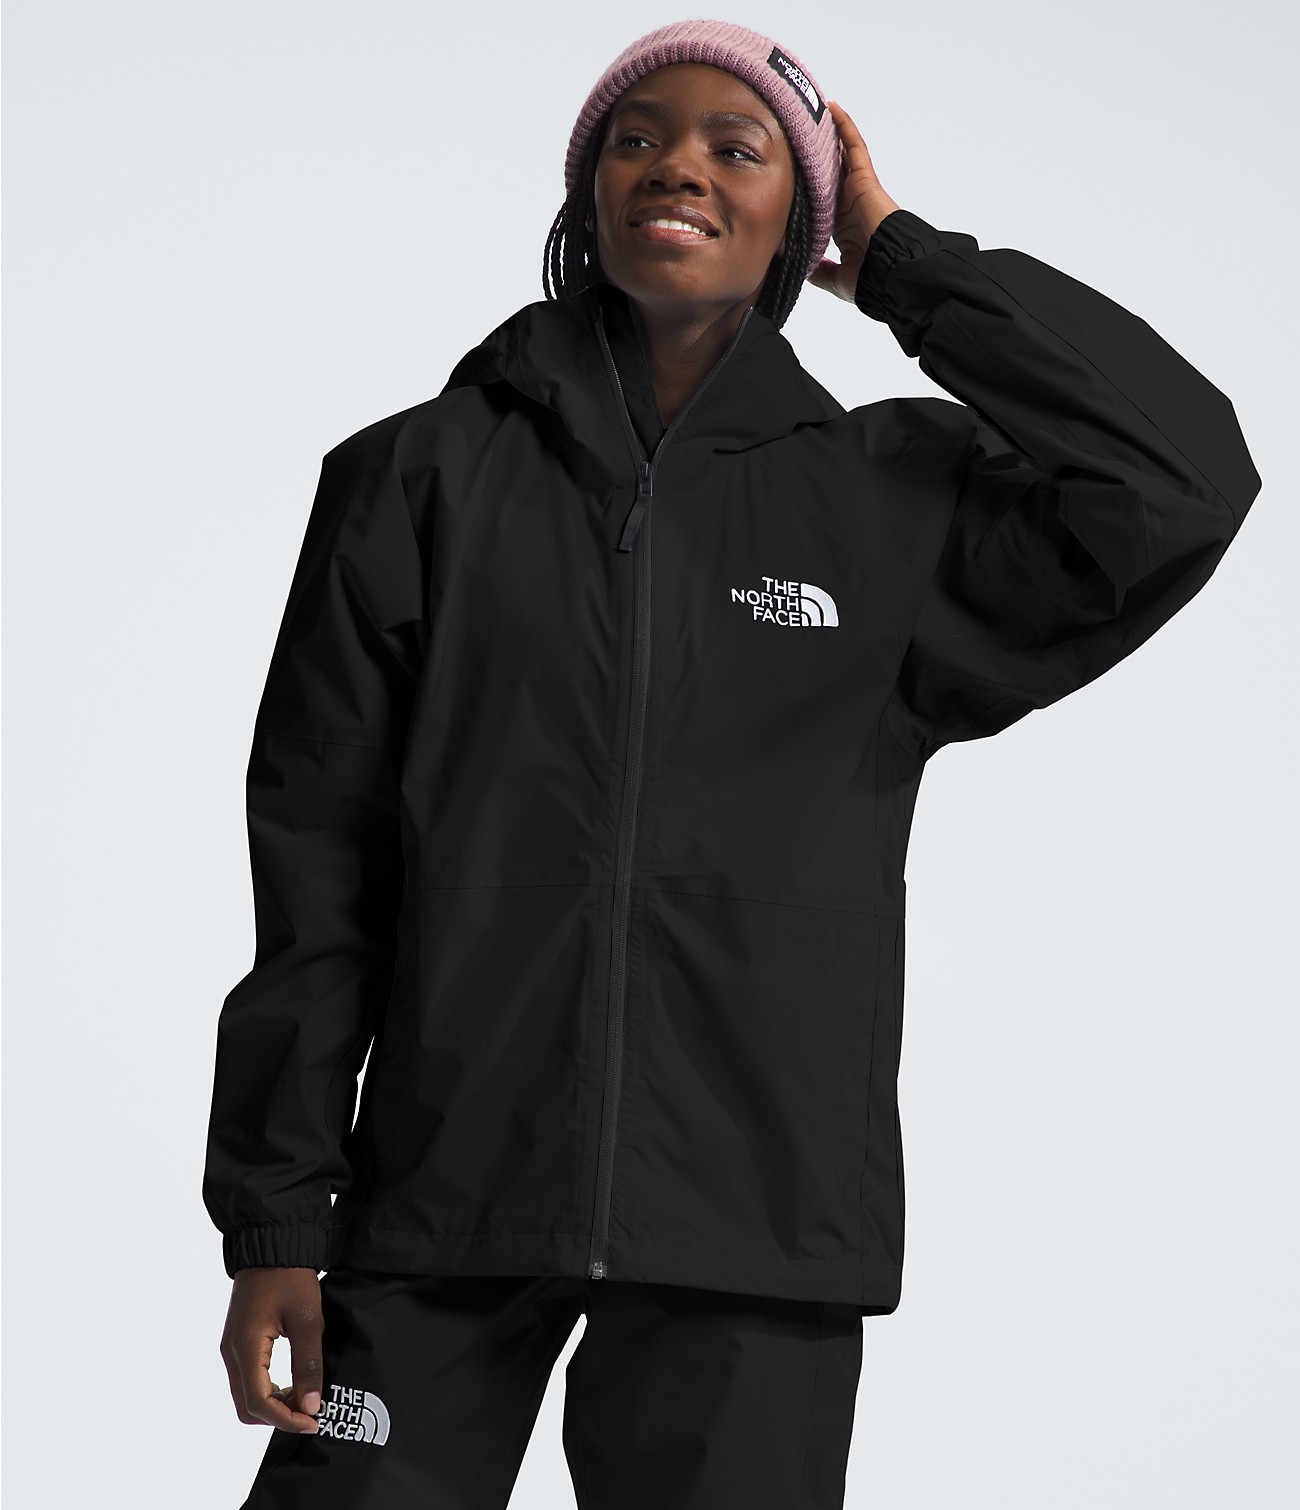 Unlock Wilderness' choice in the Burton Vs North Face comparison, the Build Up Jacket by The North Face